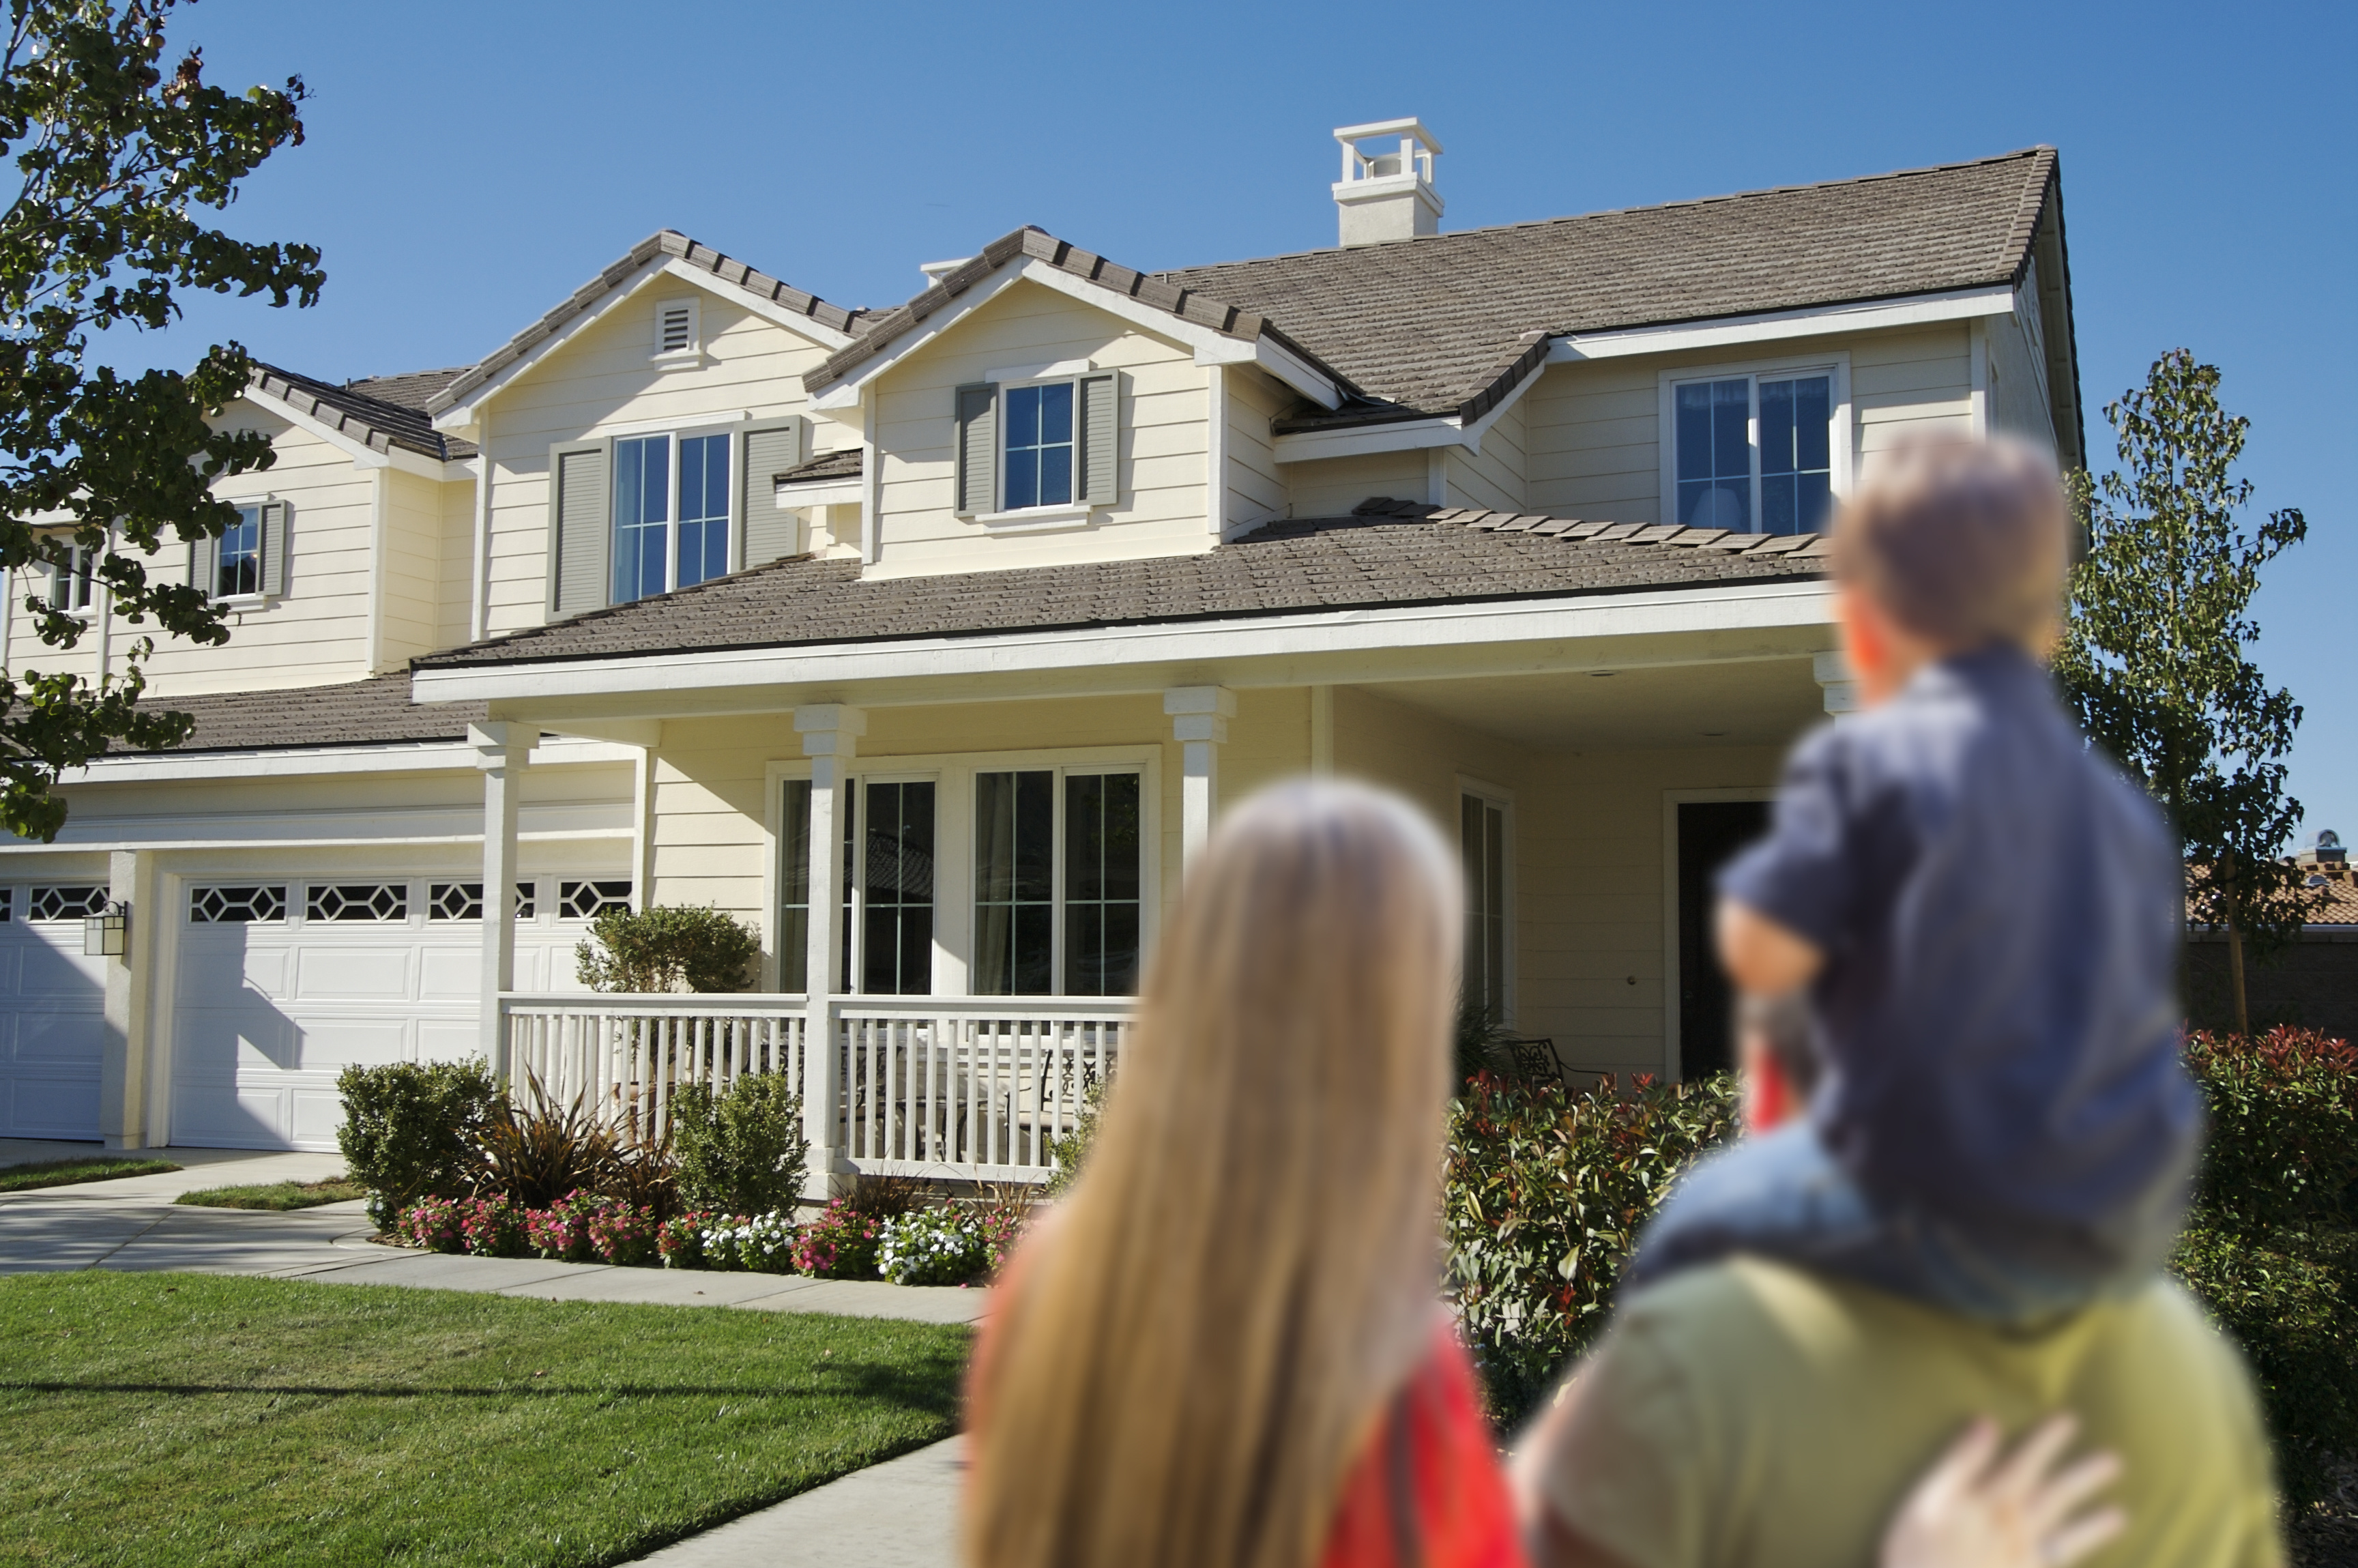 Home Buying Is a Process – What should you do next?